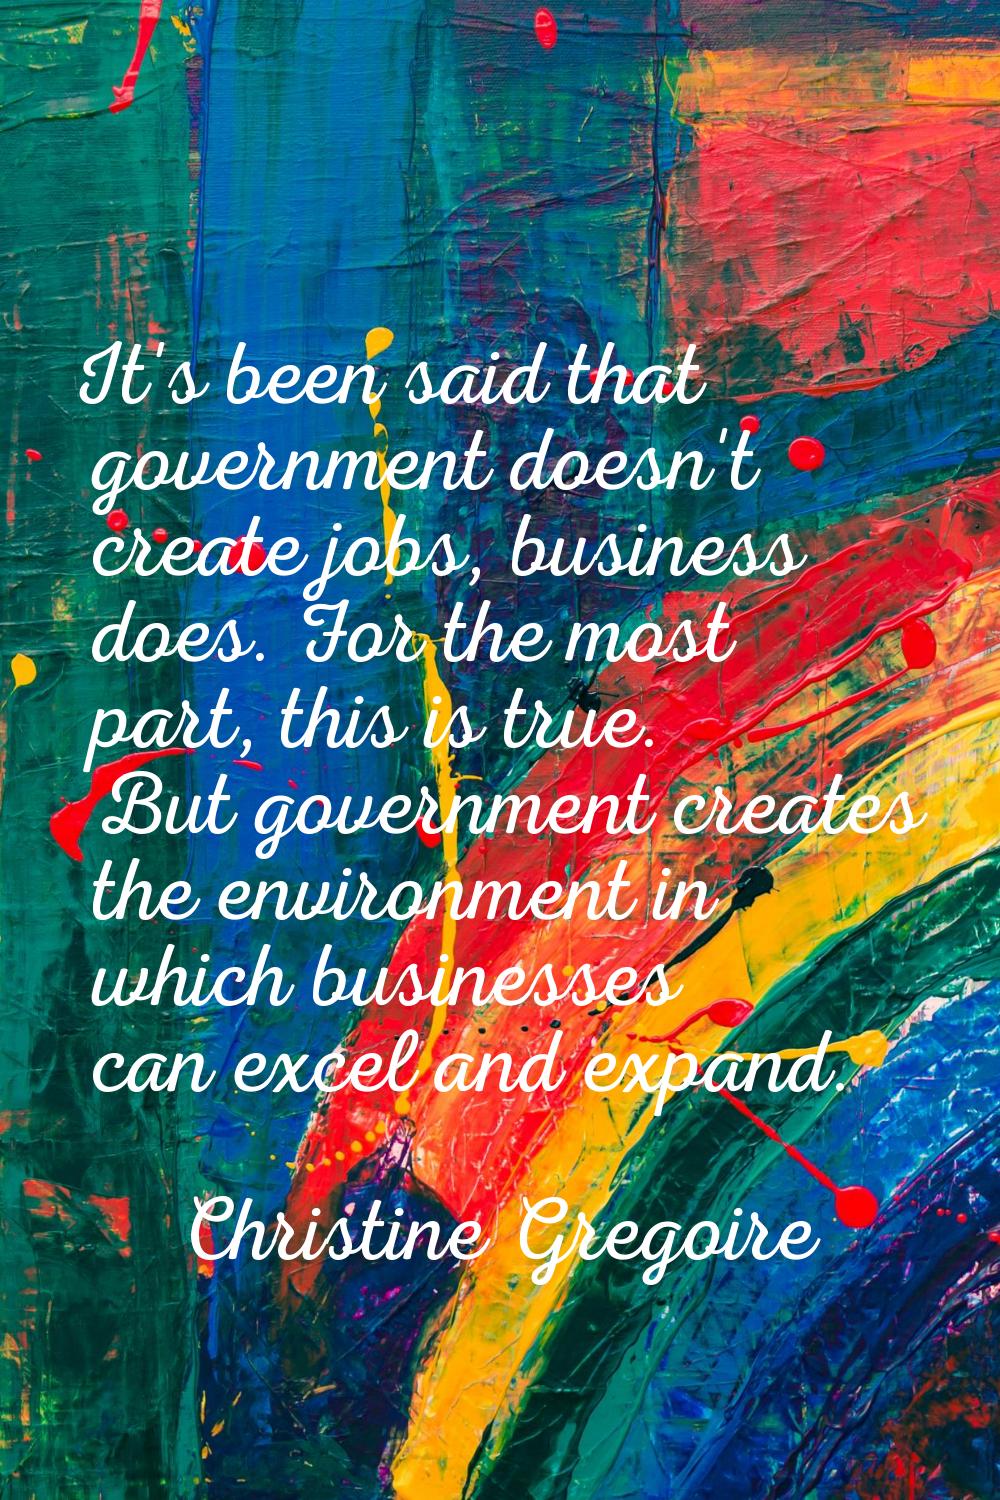 It's been said that government doesn't create jobs, business does. For the most part, this is true.